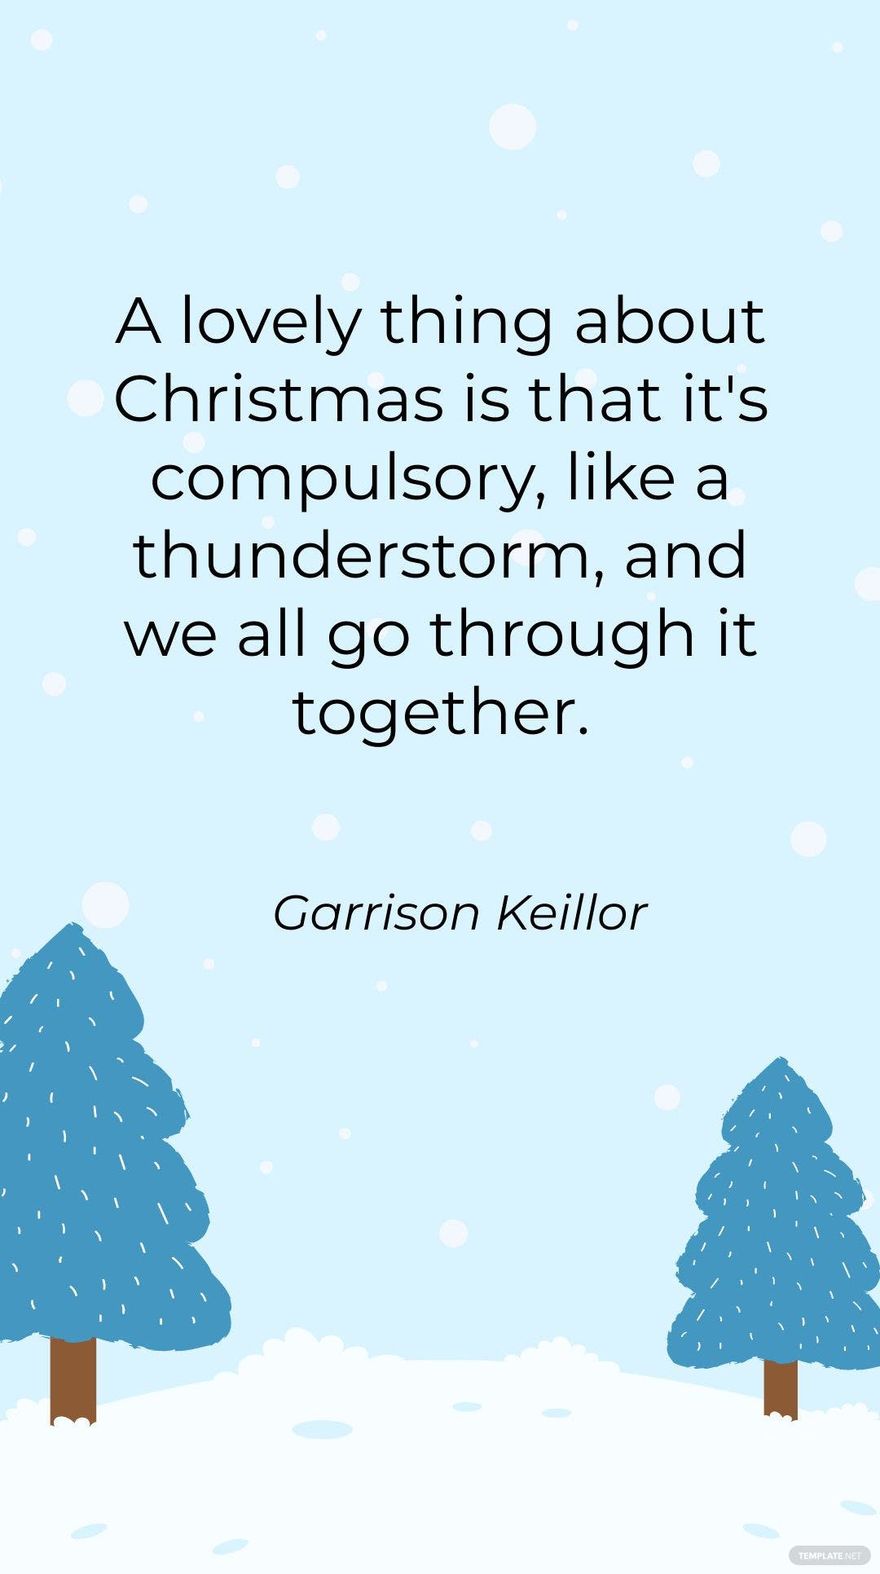 Garrison Keillor - A lovely thing about Christmas is that it's compulsory, like a thunderstorm, and we all go through it together. in JPG